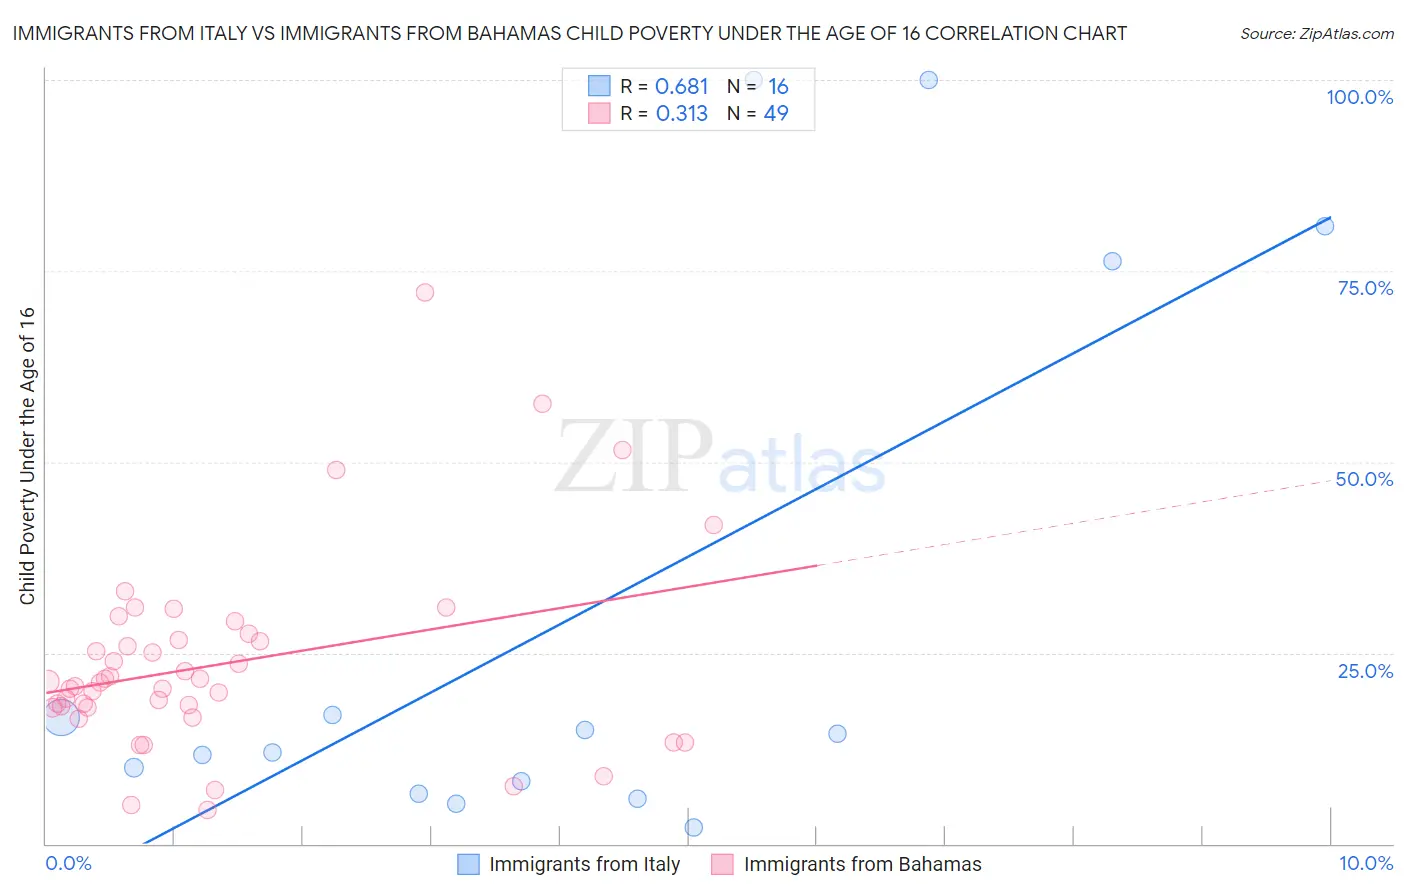 Immigrants from Italy vs Immigrants from Bahamas Child Poverty Under the Age of 16